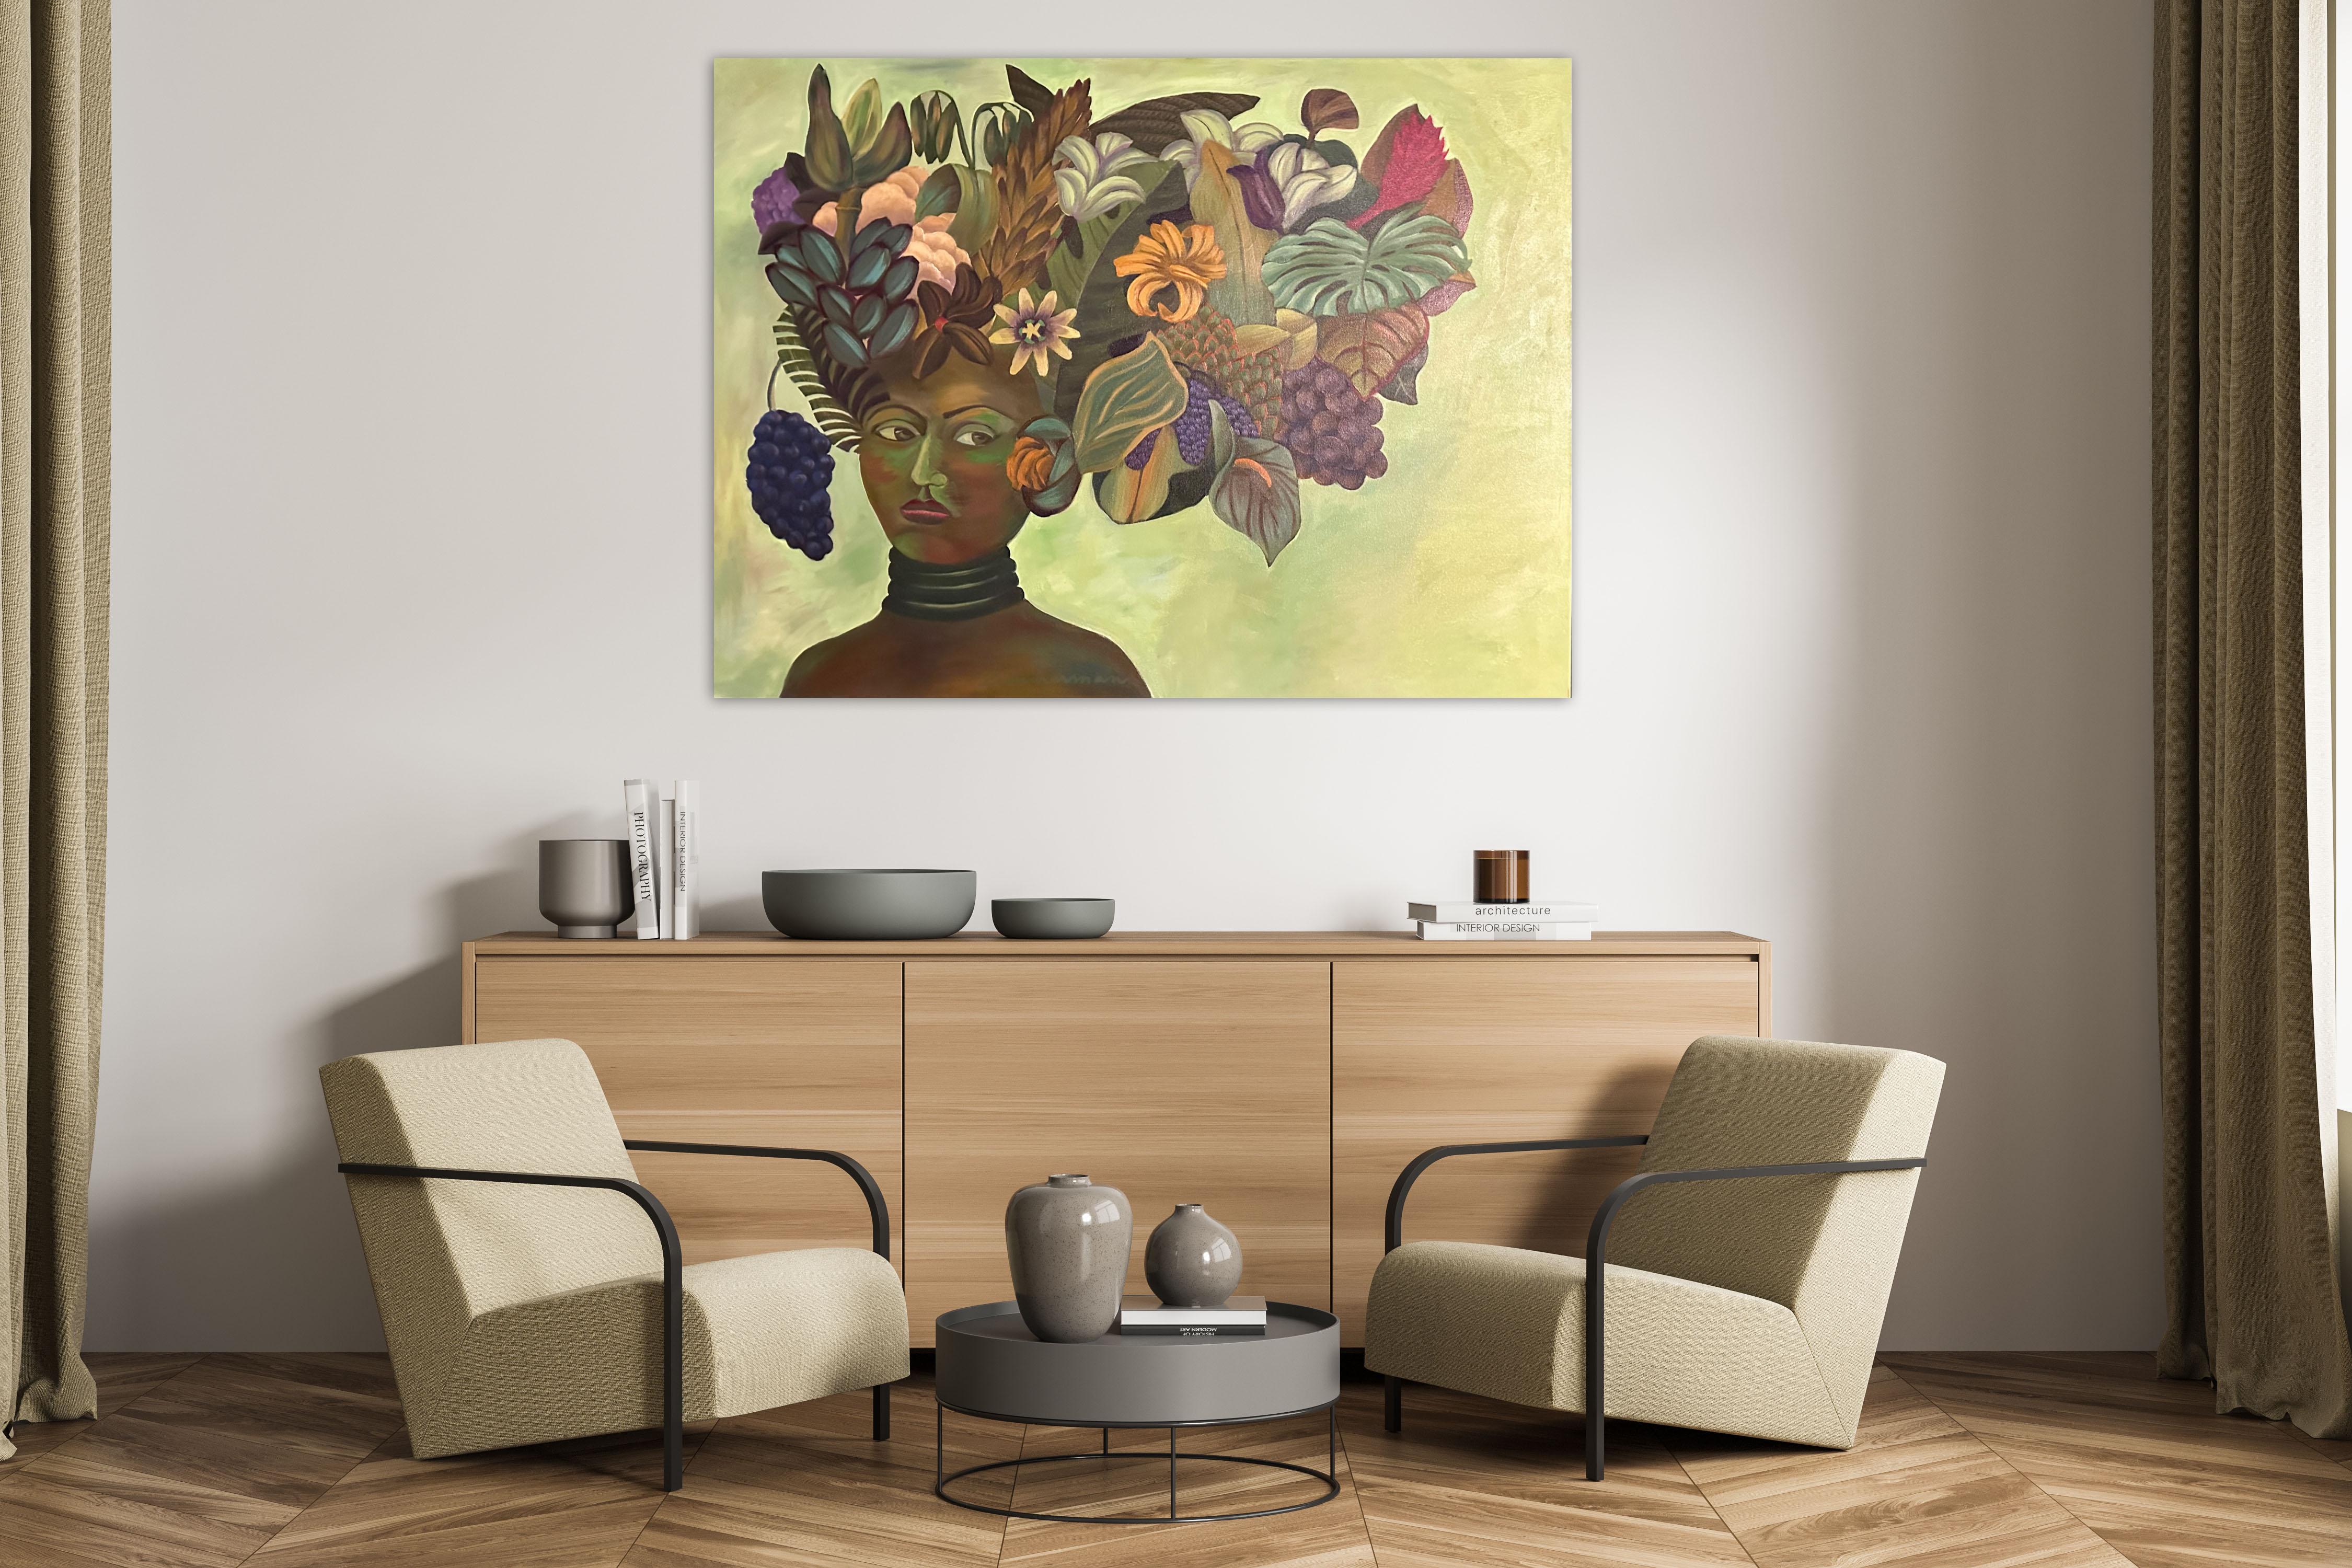 Primal woman of the jungle with a headdress of vibrant tropical plants

Flower Goddess - Figurative Paintings - Conceptual Art By Marc Zimmerman


This masterpiece is exhibited in the Zimmerman Gallery, Carmel CA.

The painting comes with a